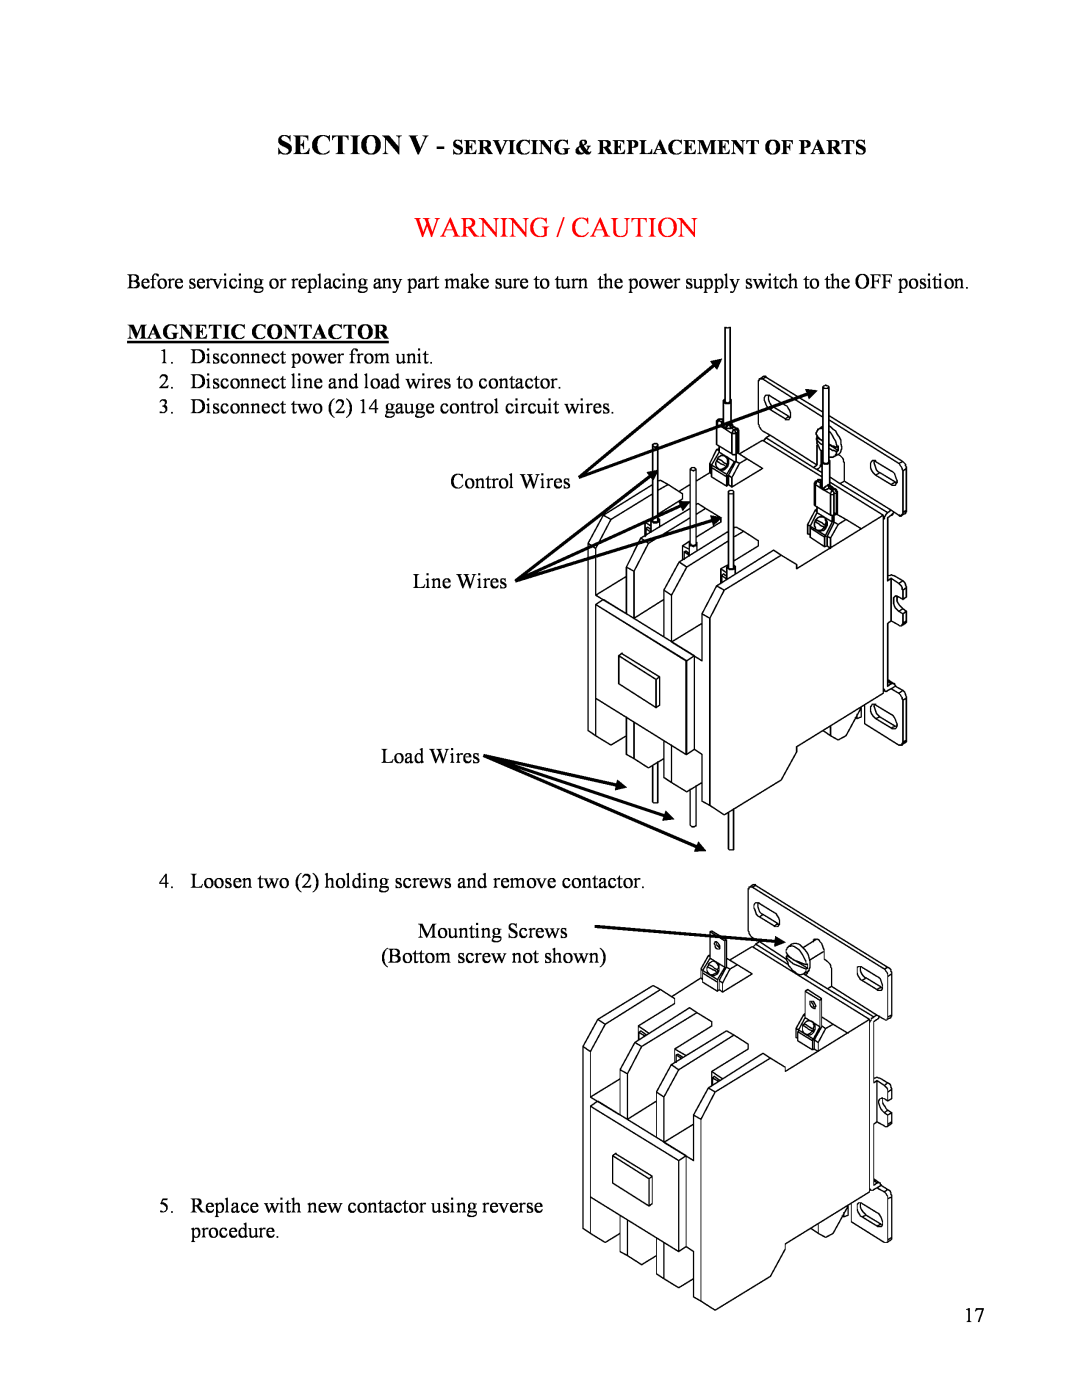 Hubbell CR manual Section V - Servicing & Replacement Of Parts, Warning / Caution, Magnetic Contactor 